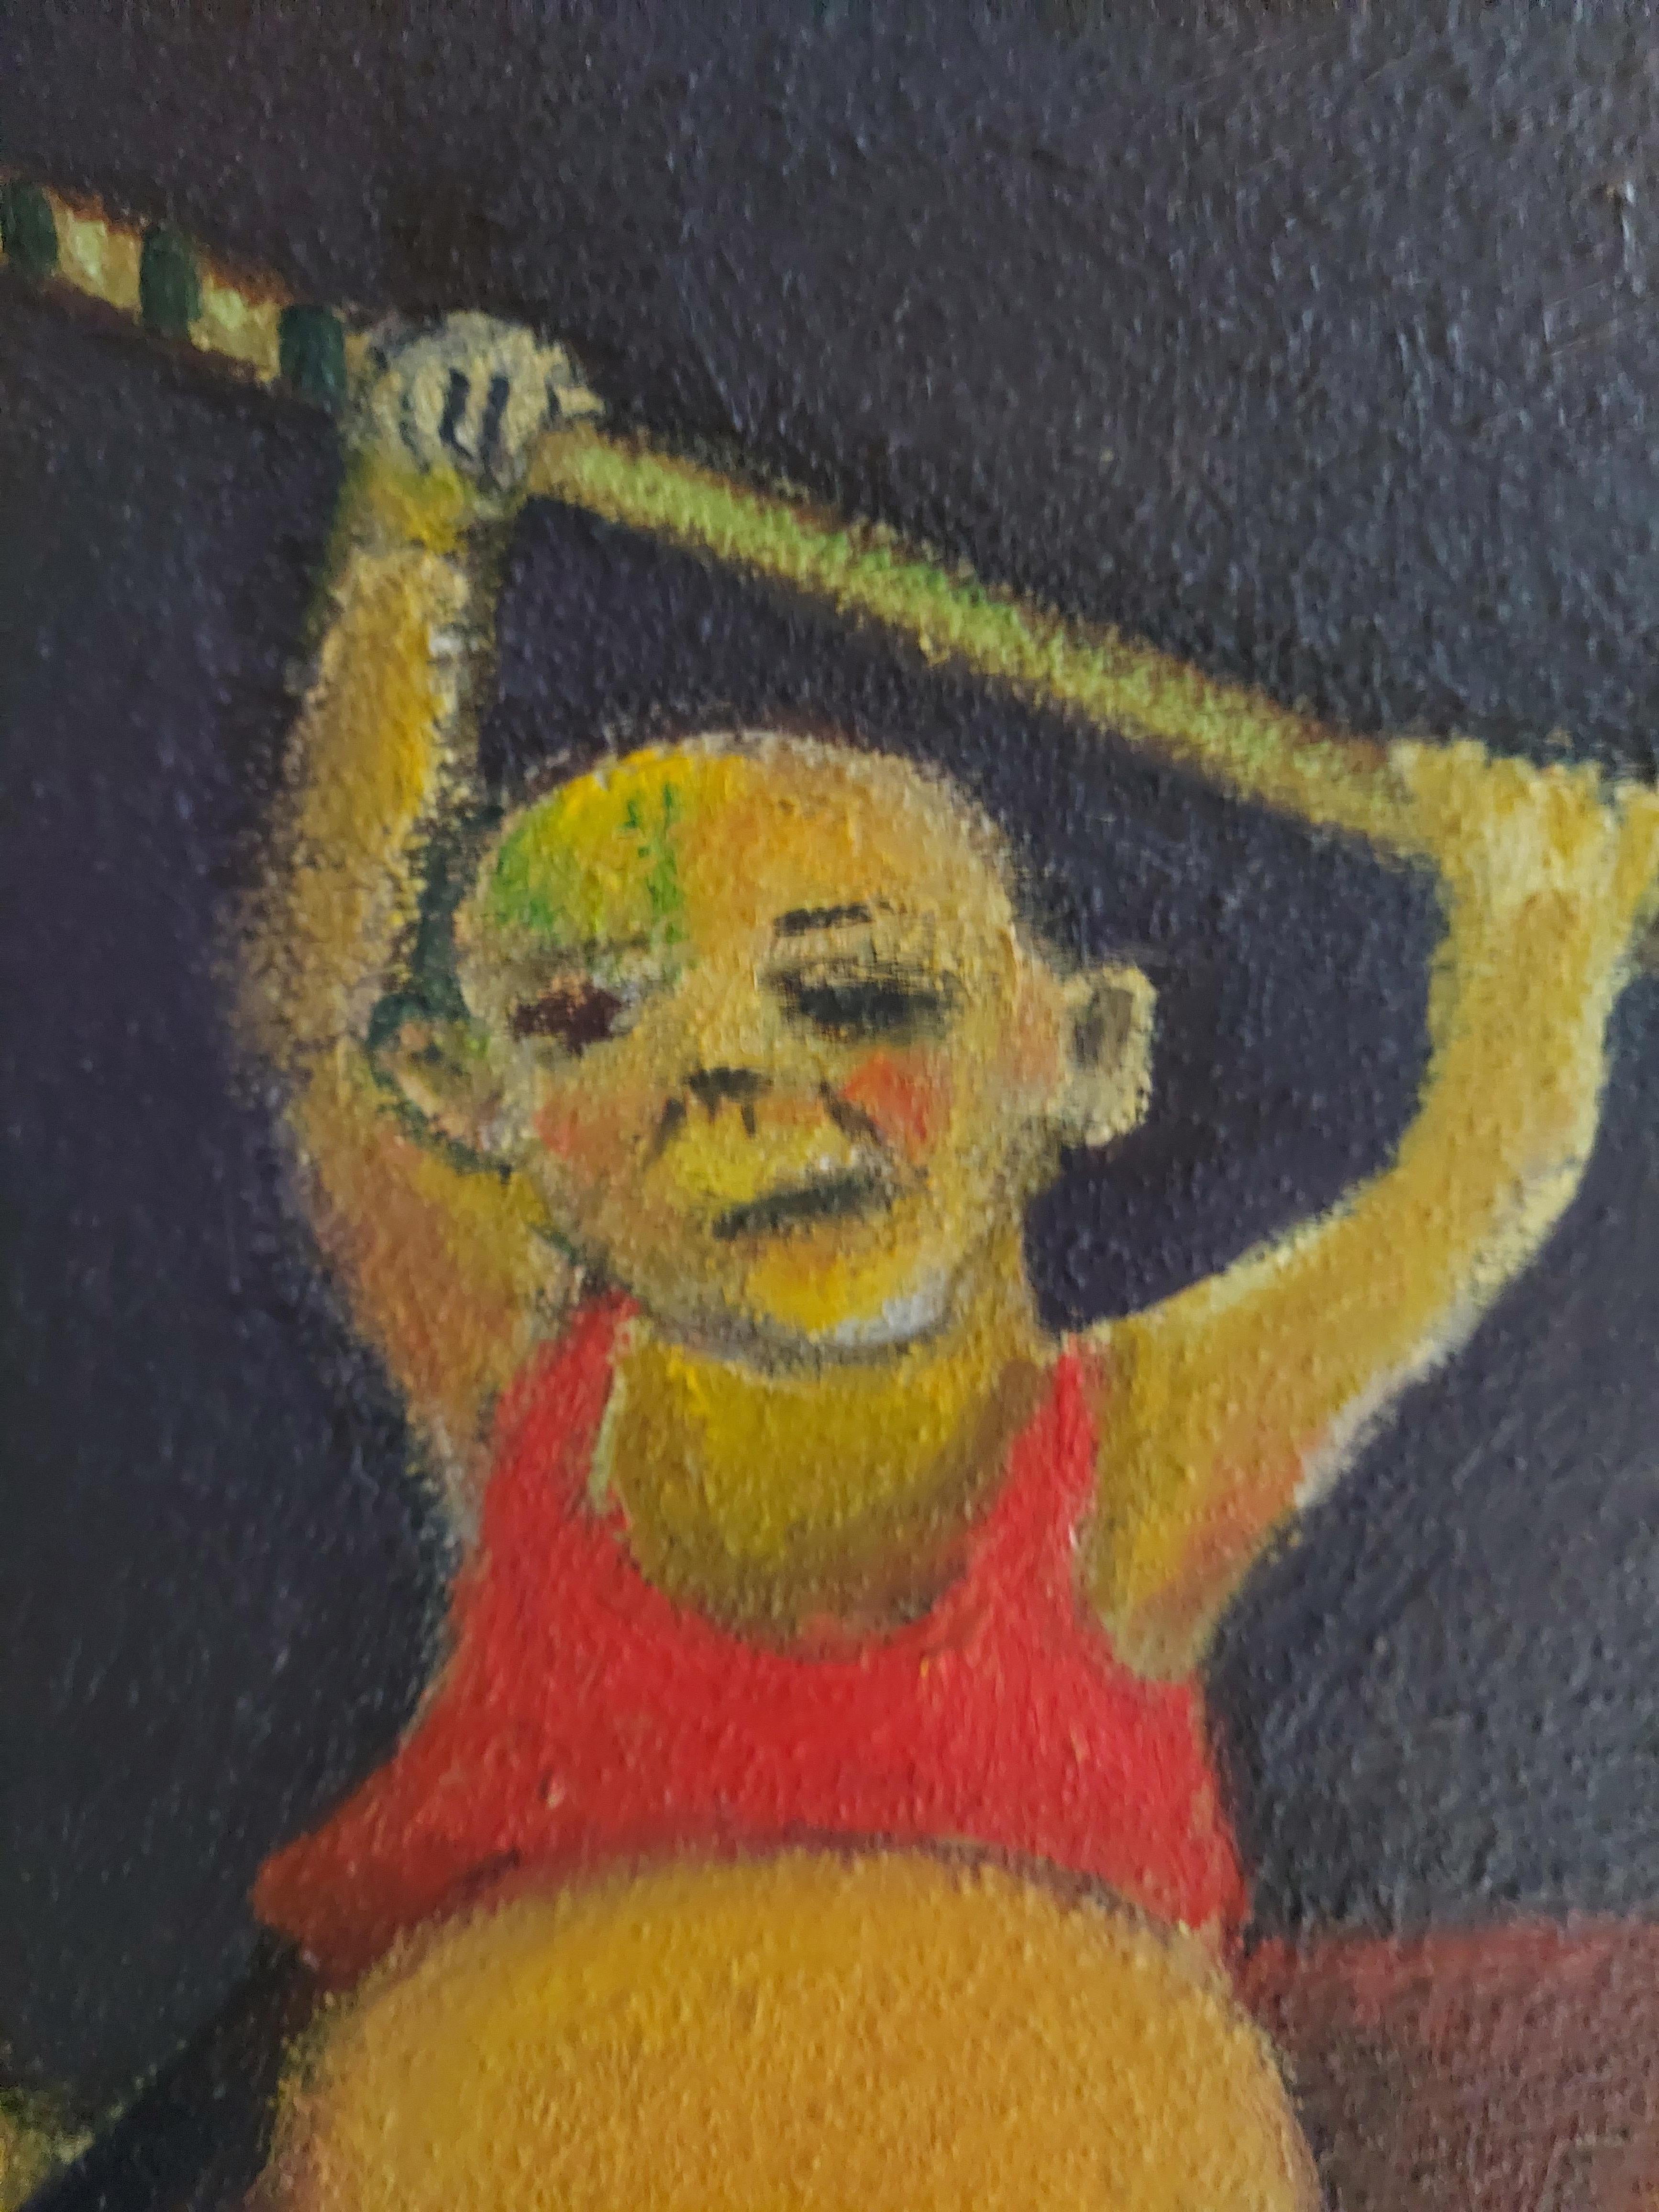 Stickball Team sports related group male figures earth and red colors - Brown Figurative Painting by Stephen Basso